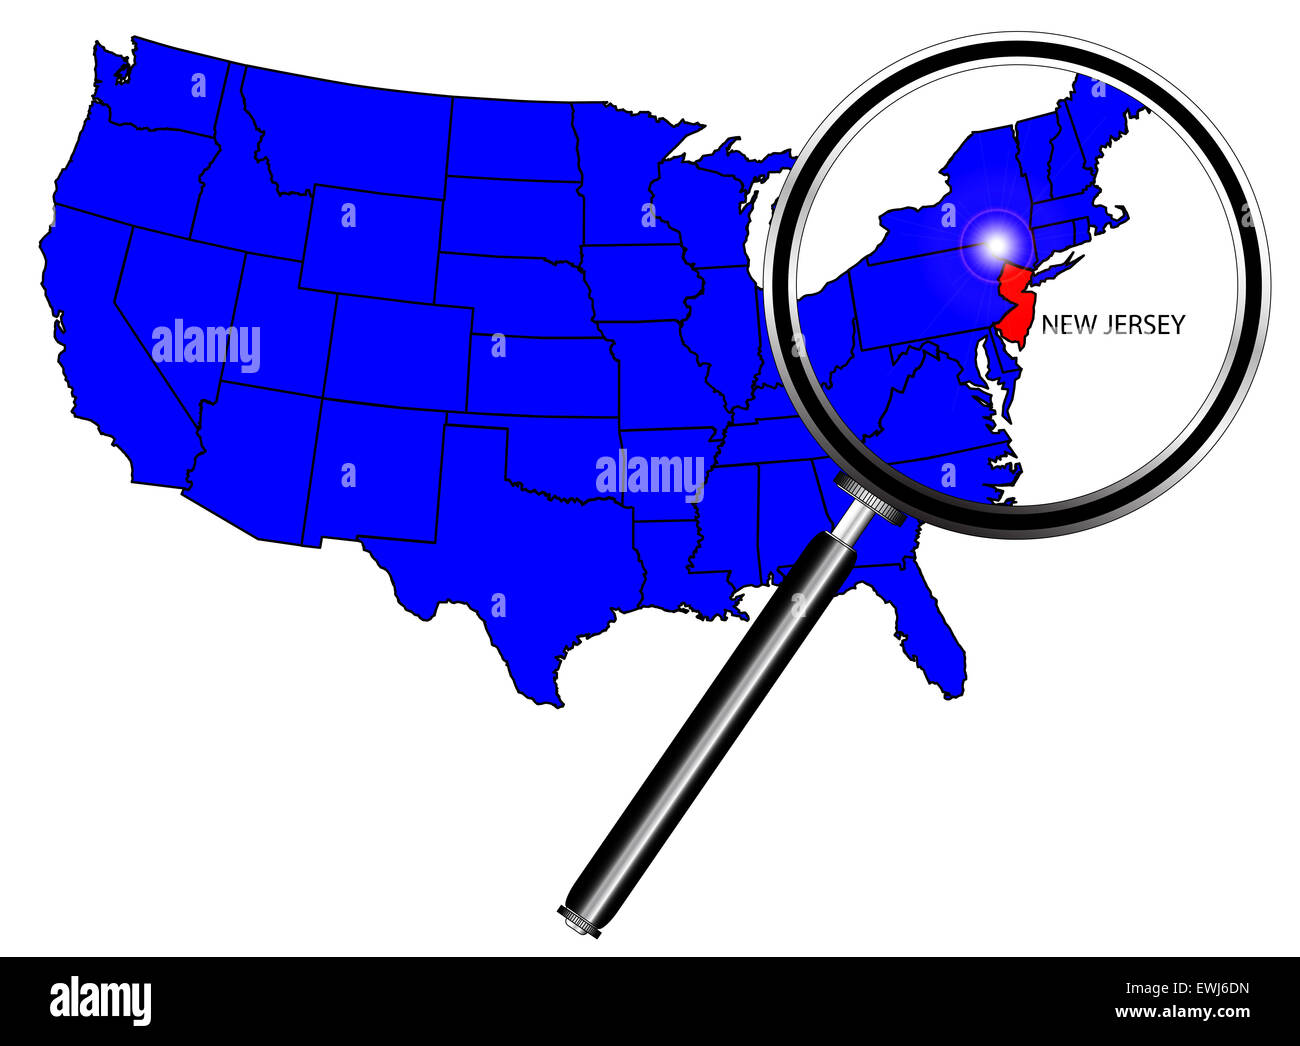 New Jersey State Outline Set Into A Map Of The United States Of Stock Photo 84608097 Alamy